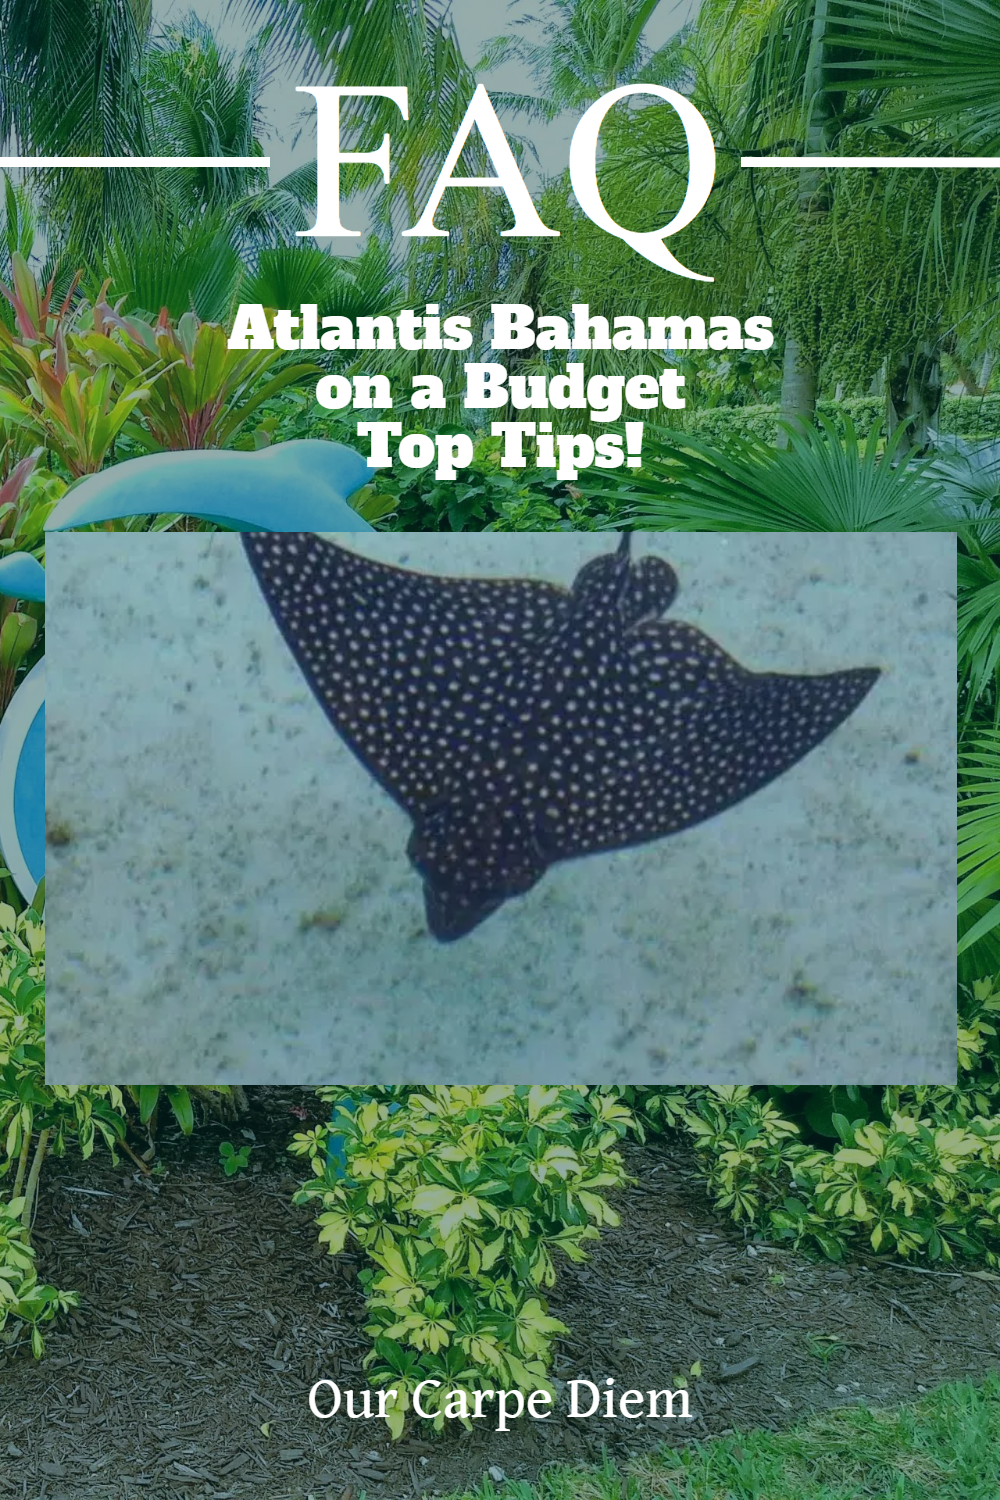 Atlantis Bahamas. How to do it on the cheap on a budget? Is the dining plan worth it? How can you get a free stay at Paradise Island? Dolphins, sharks, rays, lobsters and sawfish. How to get Caesars Diamond status for a complimentary stay in the Royal. Affordable food. The fish fry. What is #Aquaventure? #ThingToDo #TravelDestinations #BudgetTravel. #ComfortSuites #ParadiseIsland #OurCarpeDiem #Atlantis